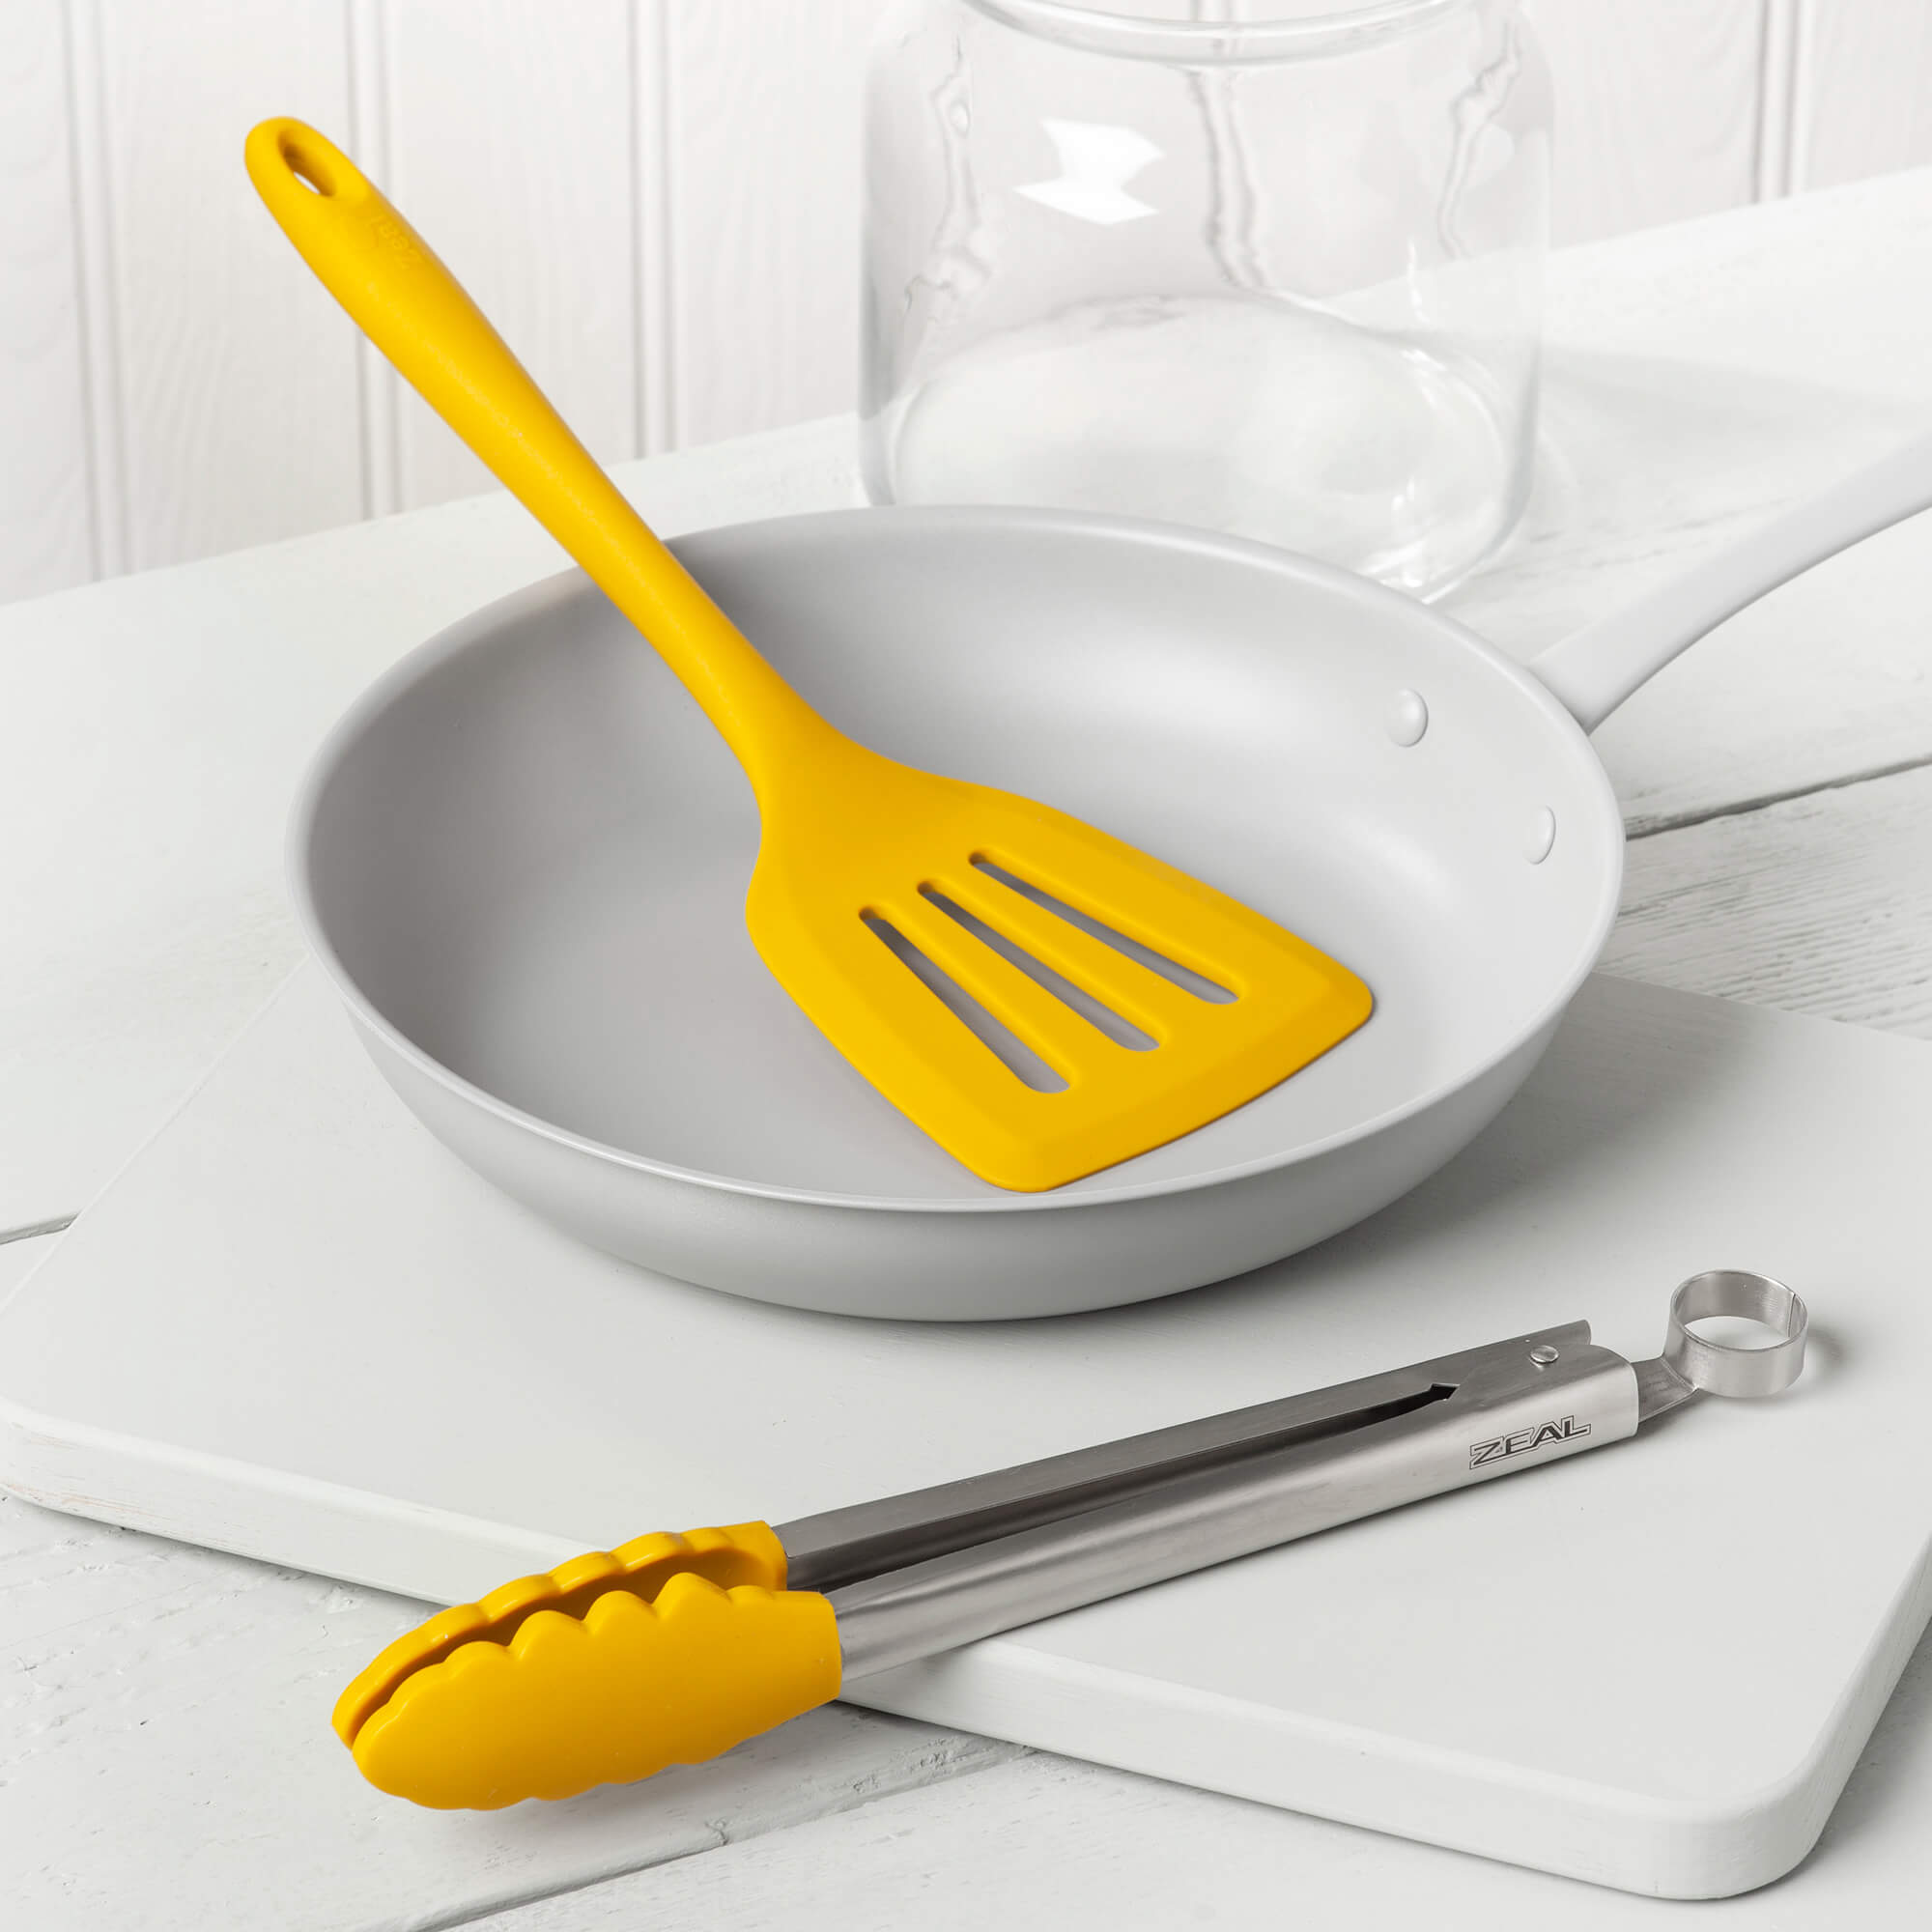 Zeal Silicone Kitchen Tongs & Slotted Turner Set in Mustard